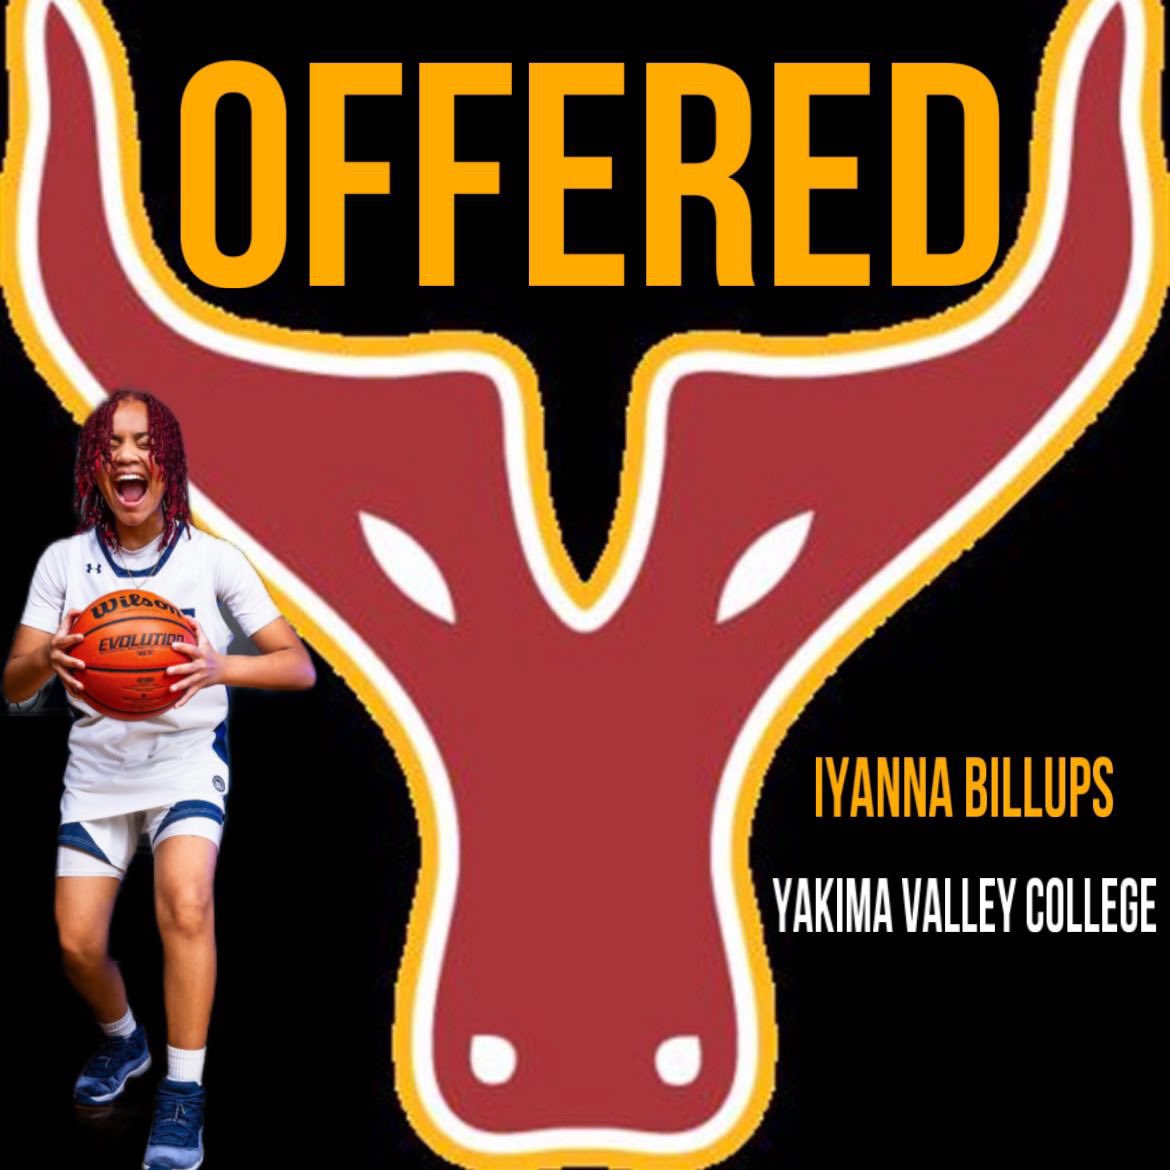 Blessed to have received an Offer from Yakima Valley College ❤️💛!